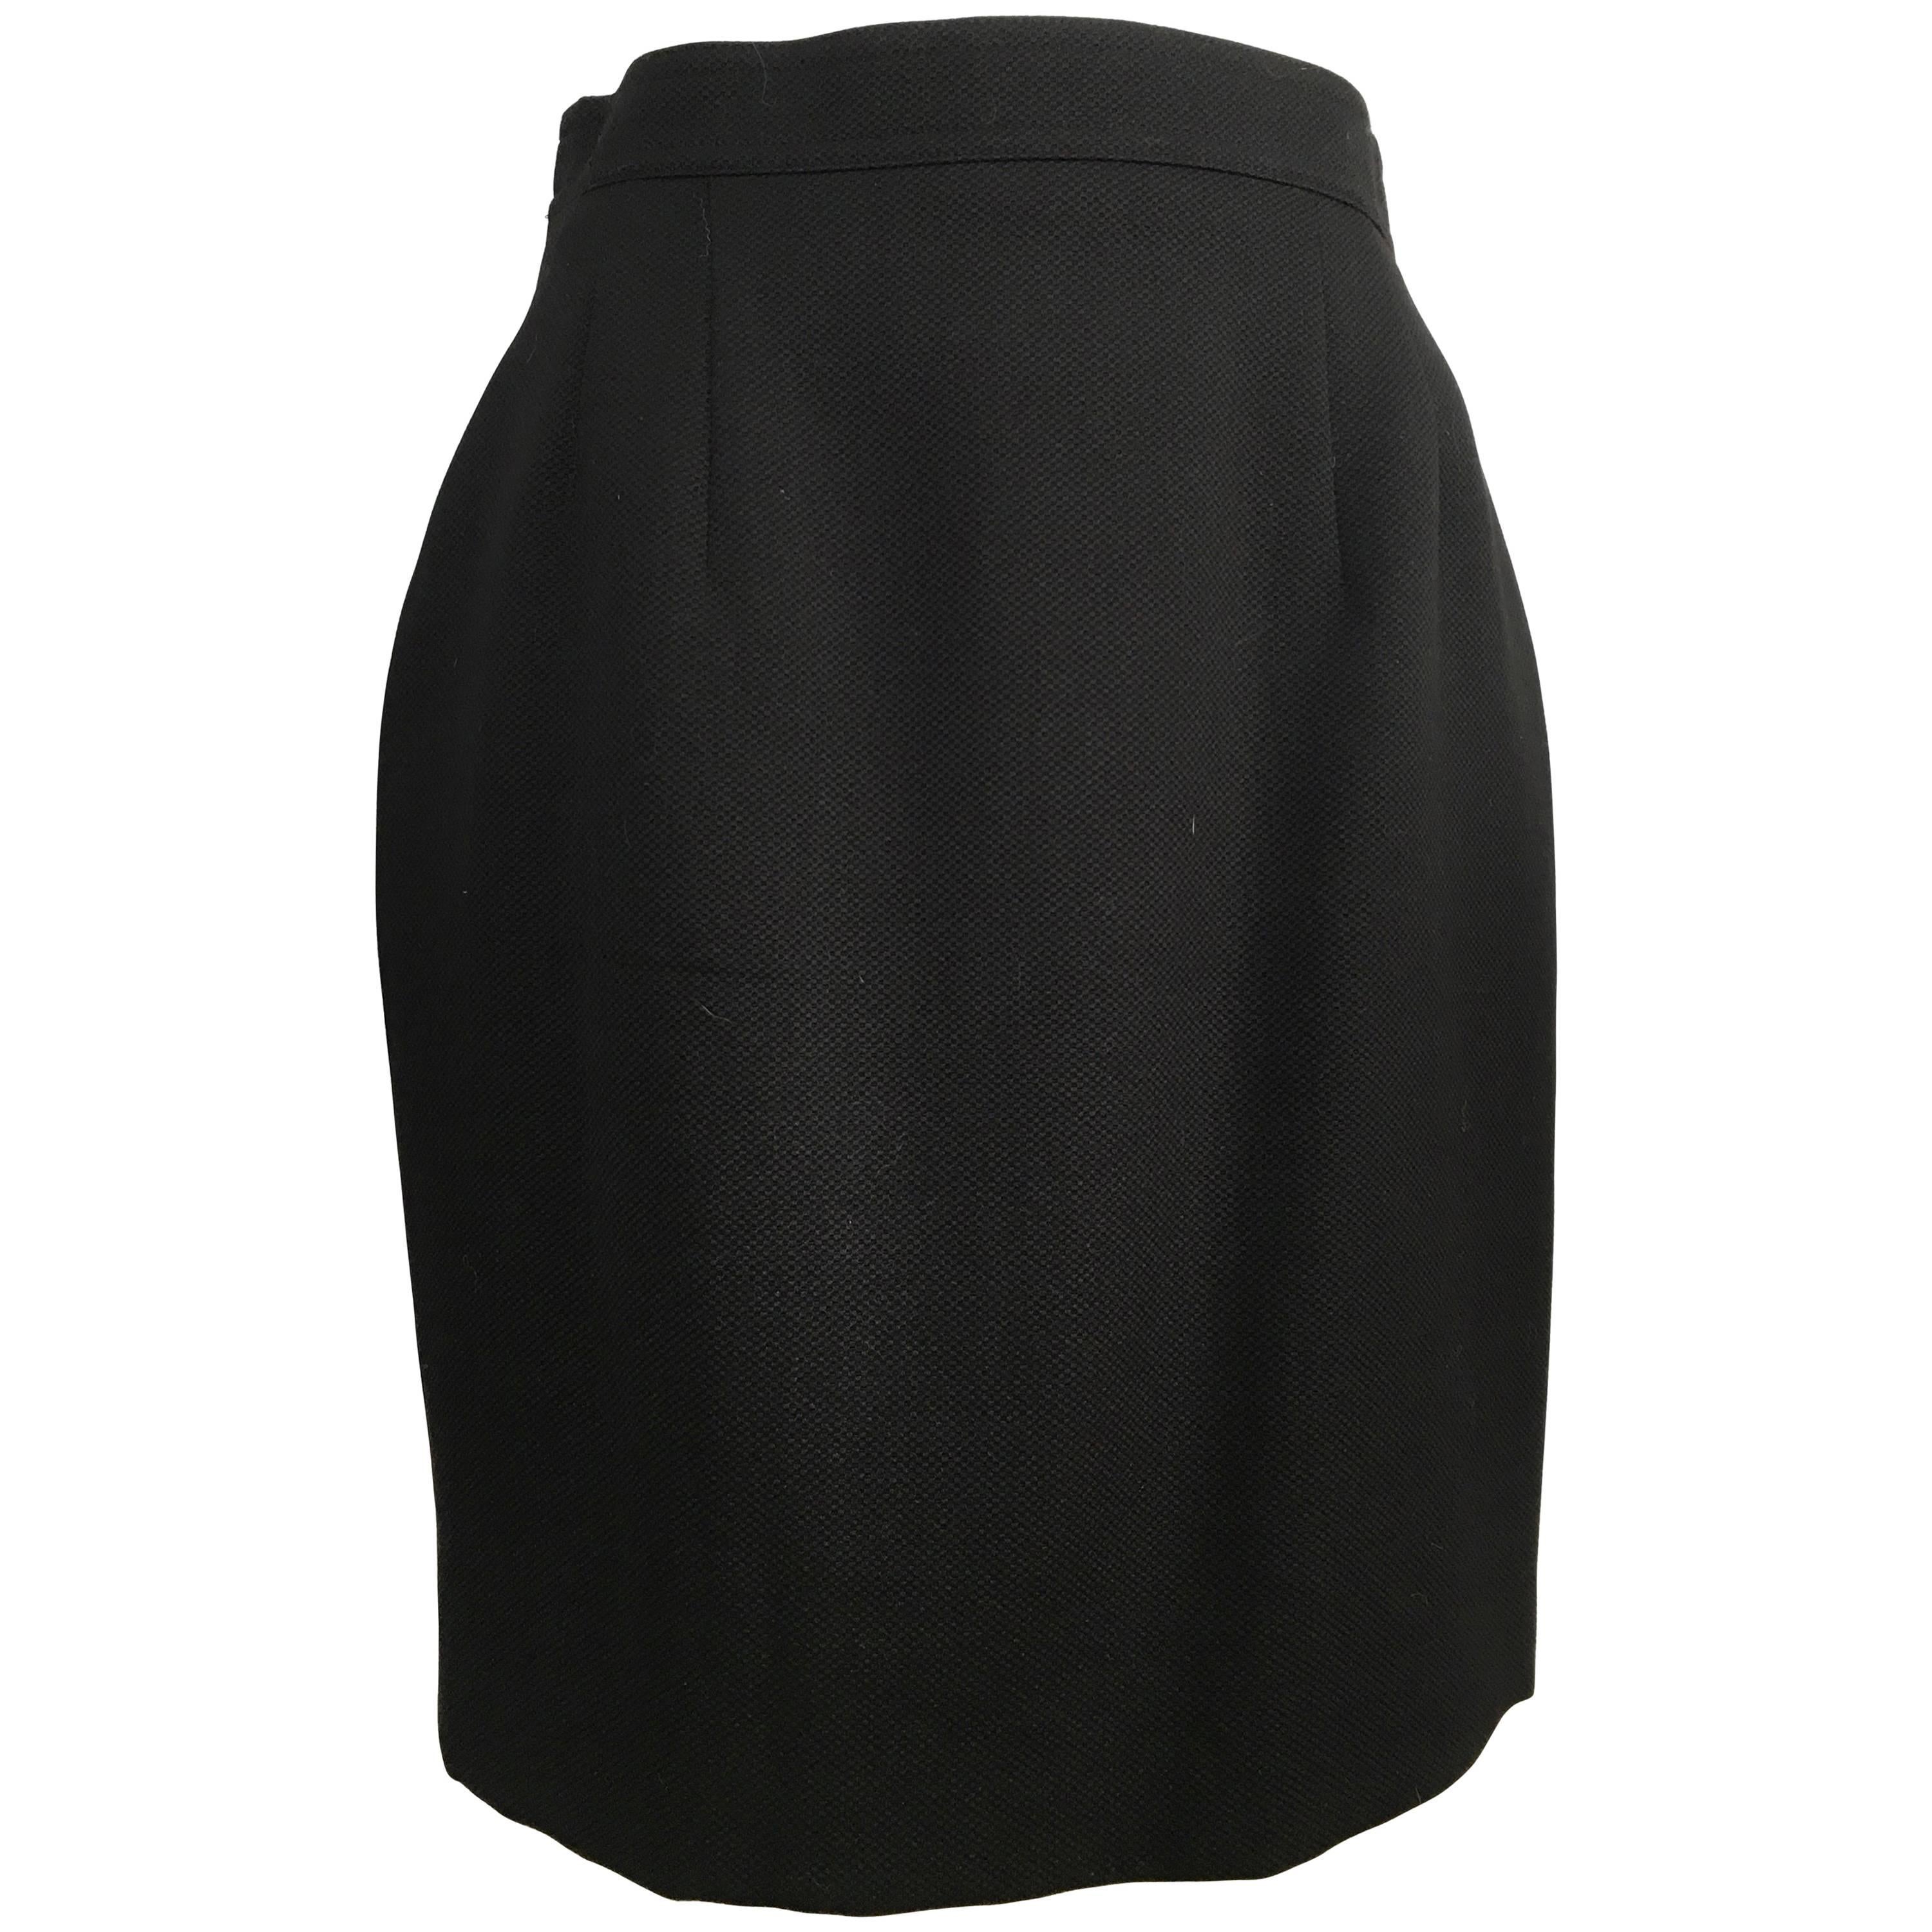 Karl Lagerfeld 1990s Black Wool Pencil Skirt Size 6. For Sale